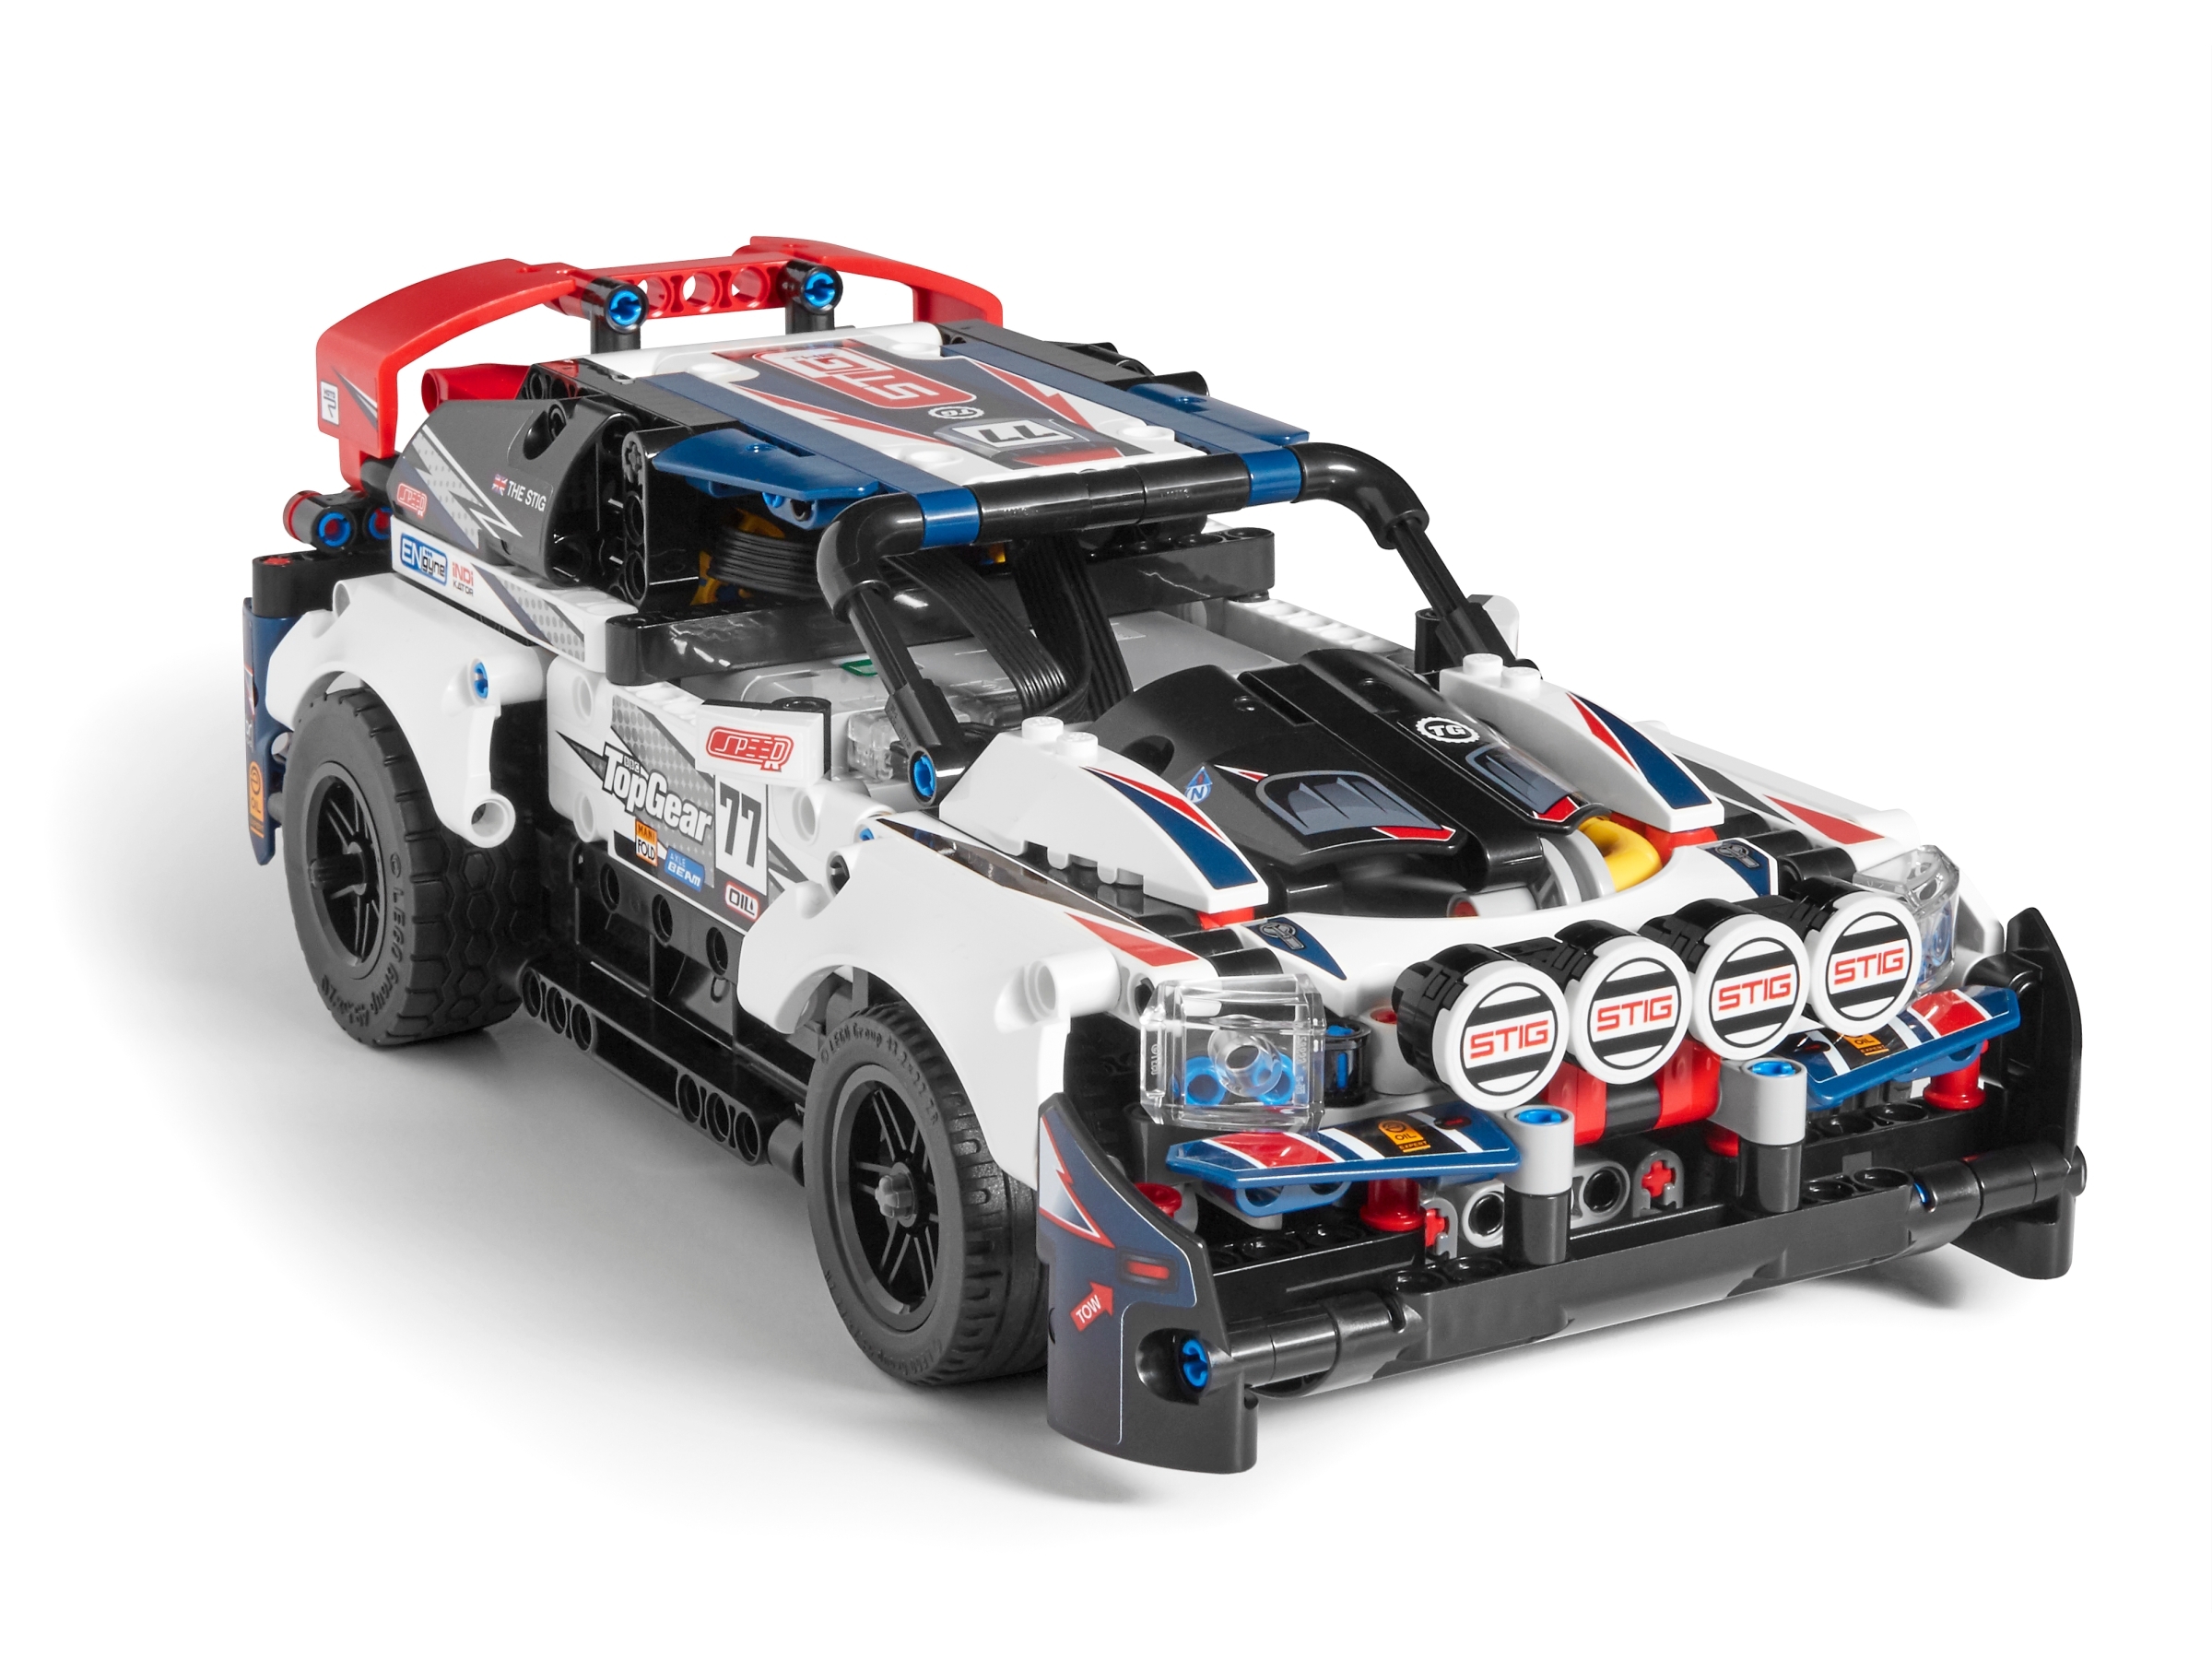 Briksmax Led Lighting Kit for Technic App-Controlled Top Gear Rally Car Not Include The Lego Set Compatible with Lego 42109 Building Blocks Model 